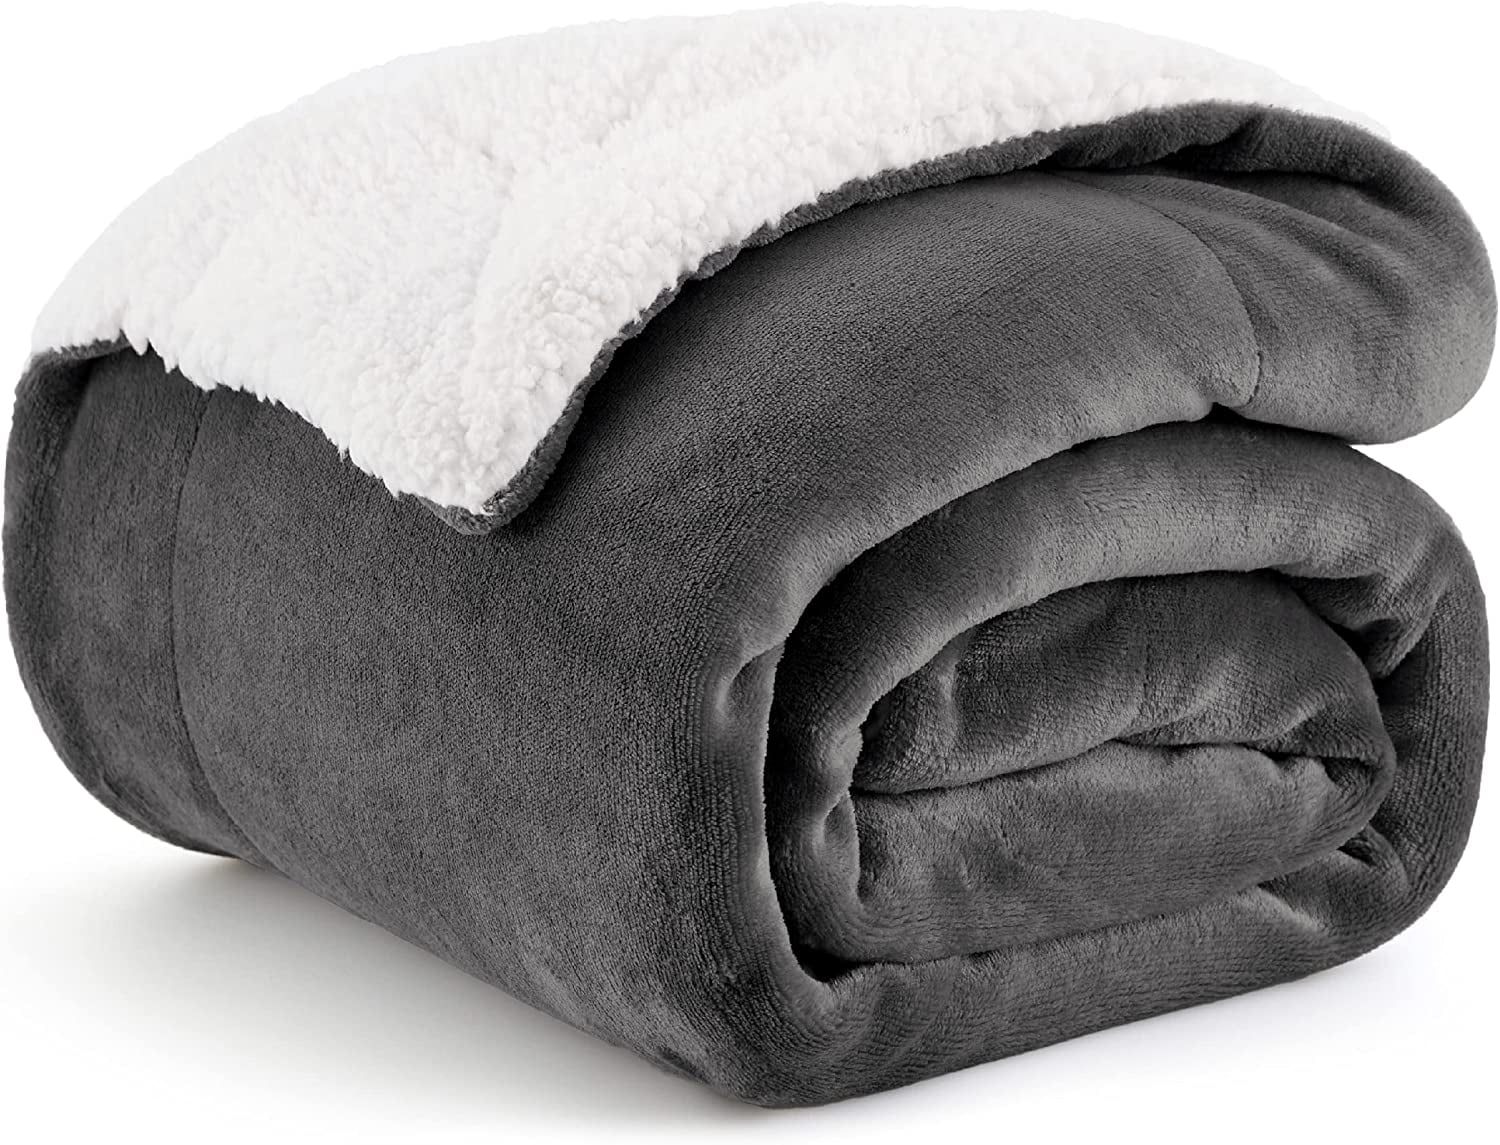 Bedsure Sherpa Fleece Throw Blanket Twin Size Charcoal - Thick and